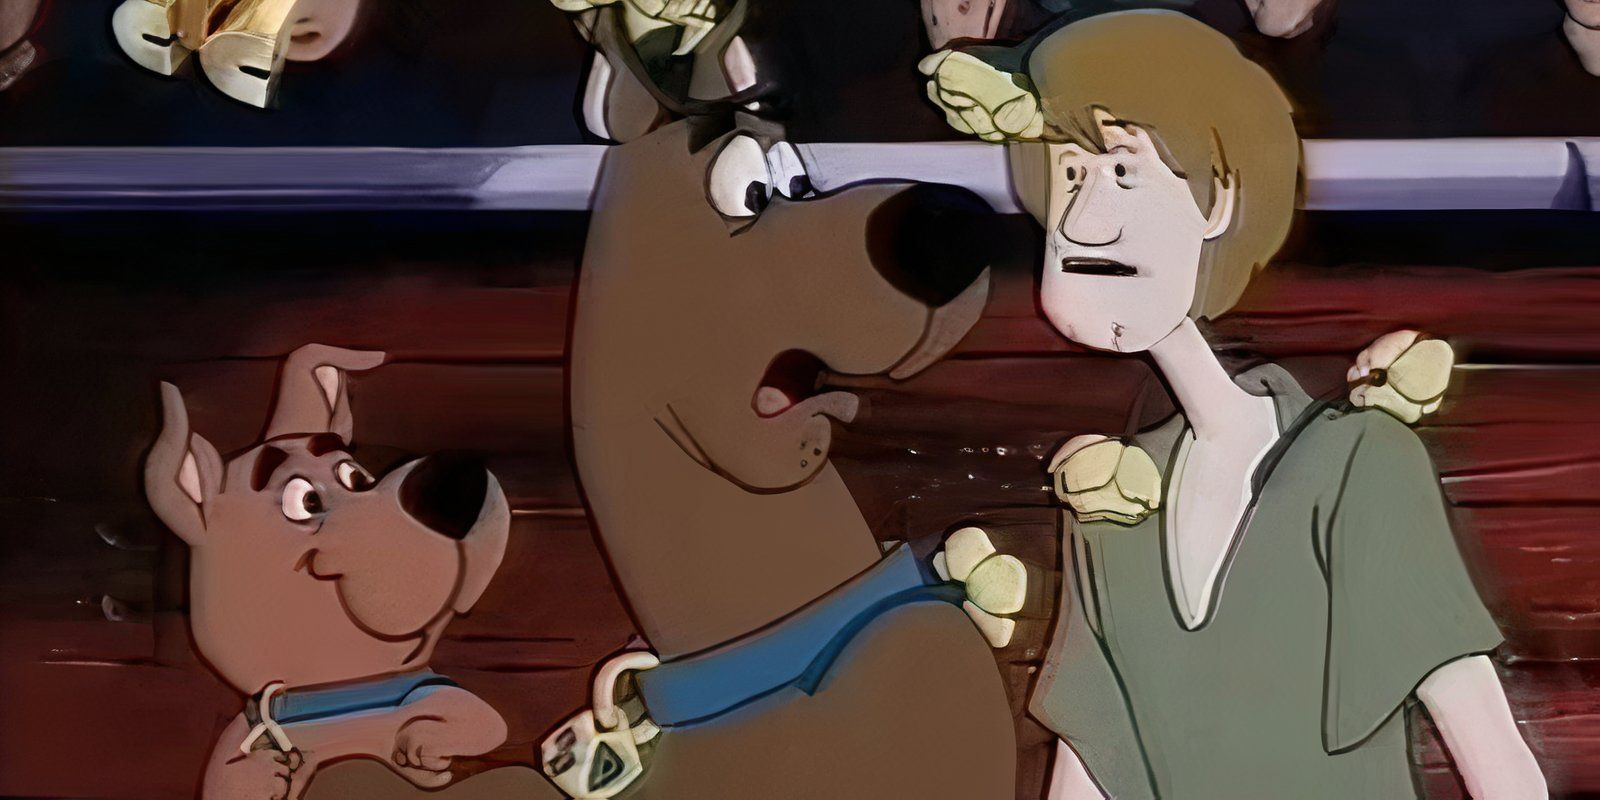 Scrappy, Scooby, and Shaggy amid falling flowers in a Scooby Doo animated series